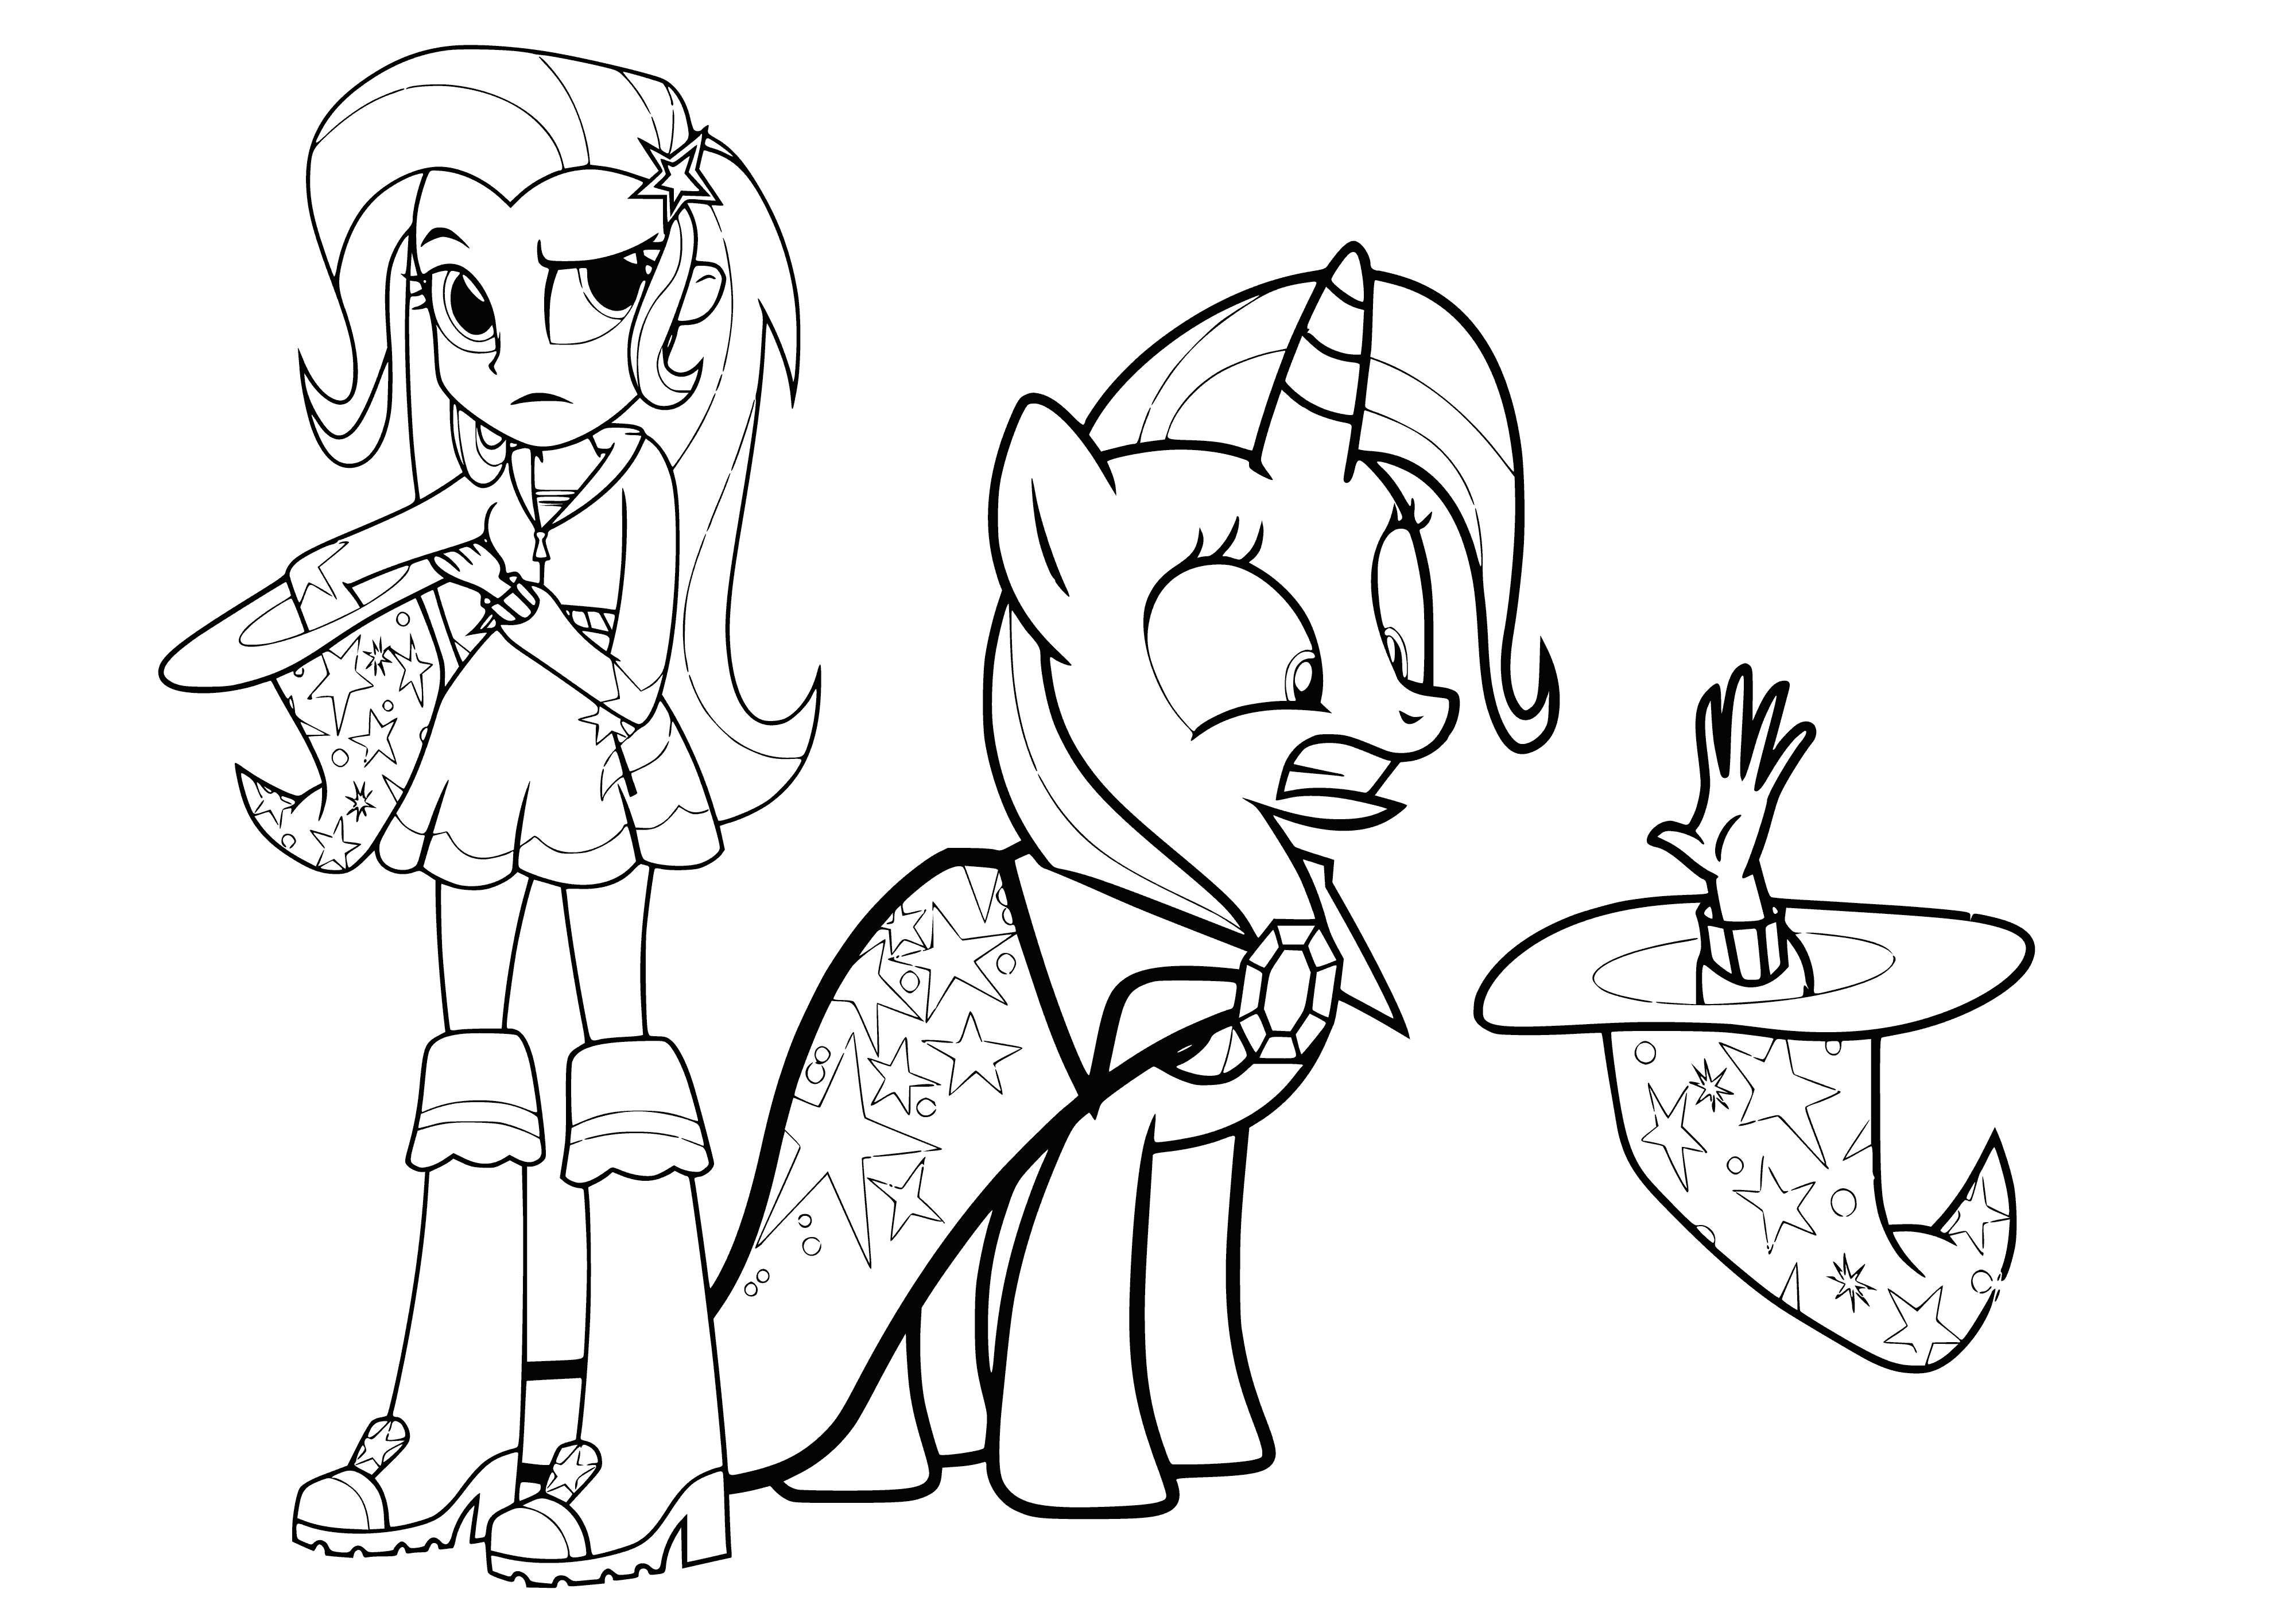 coloring page: Trixie and her pony stand together, ready to take on the world. Trixie has her wand, her pony, and her confidence. #magic